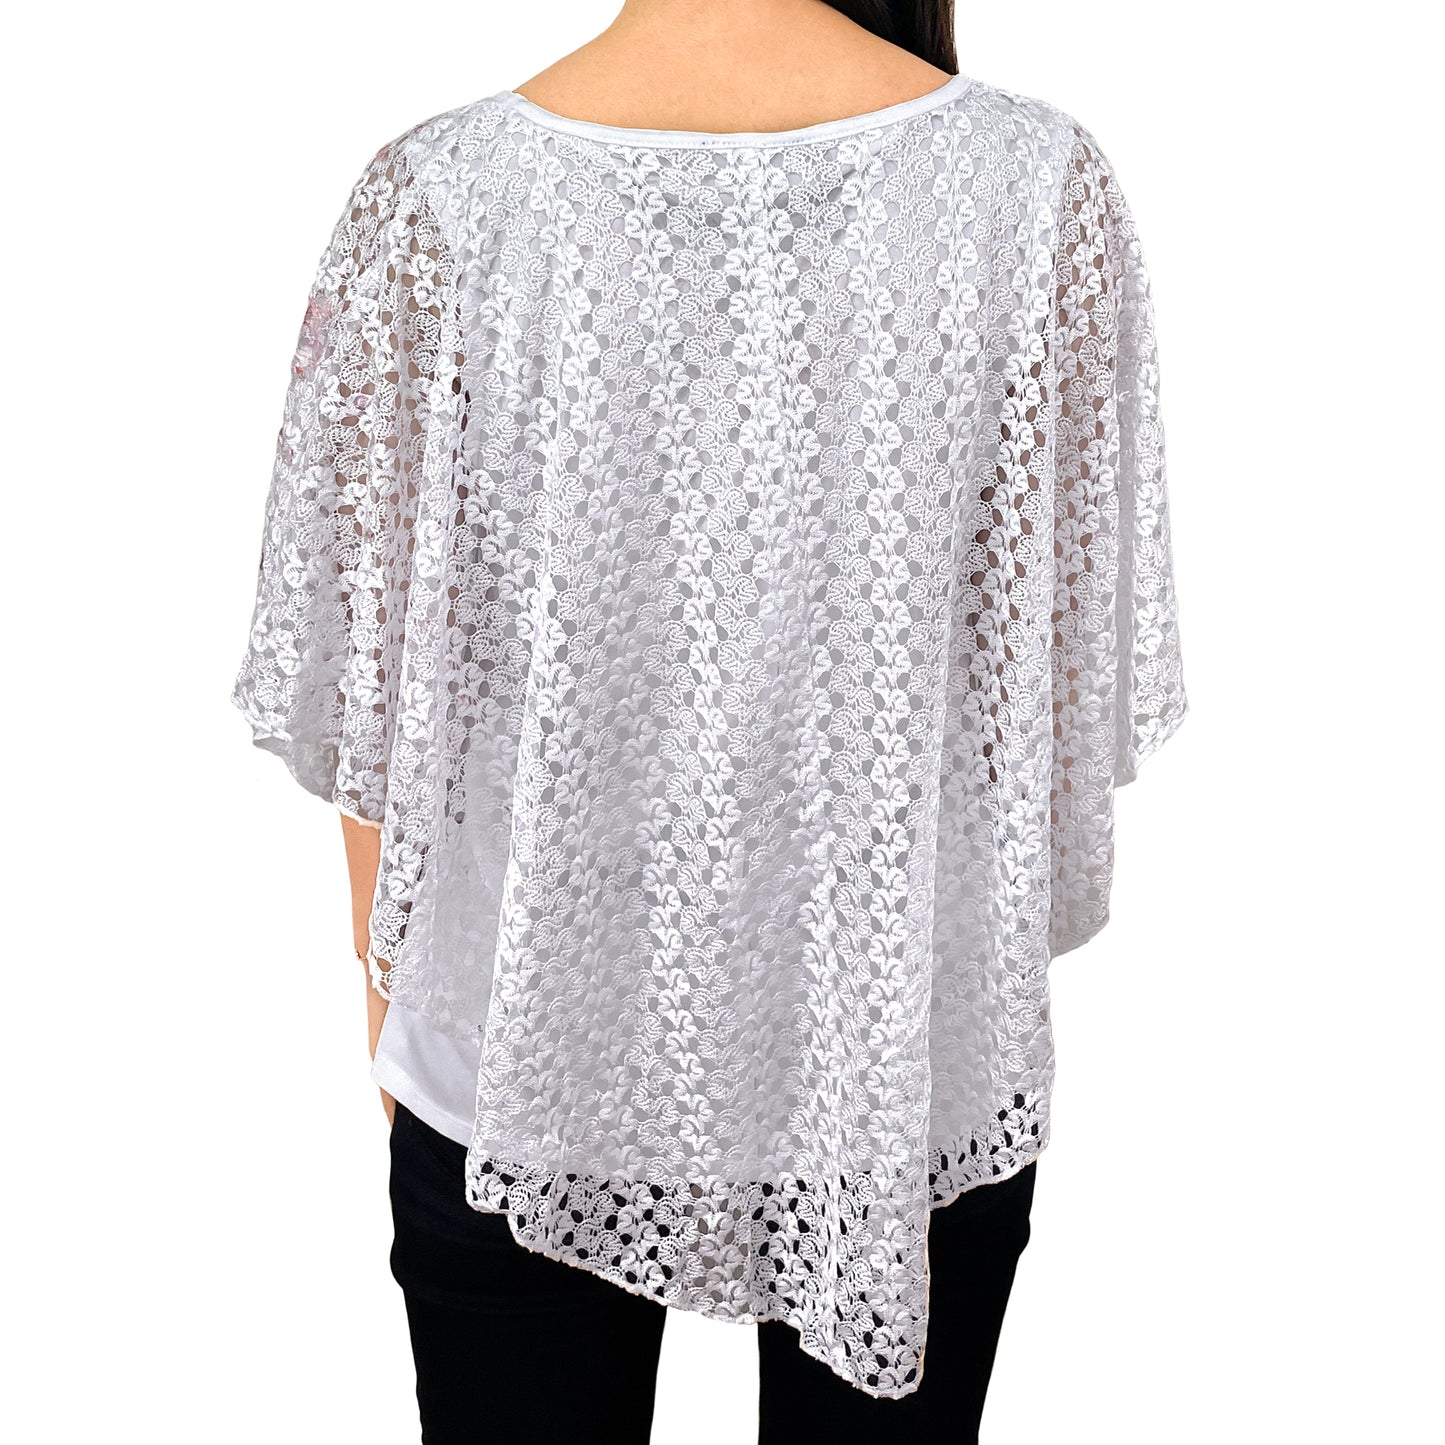 Colorful Floral/White Lace V-Neck 3/4 Sleeve Poncho